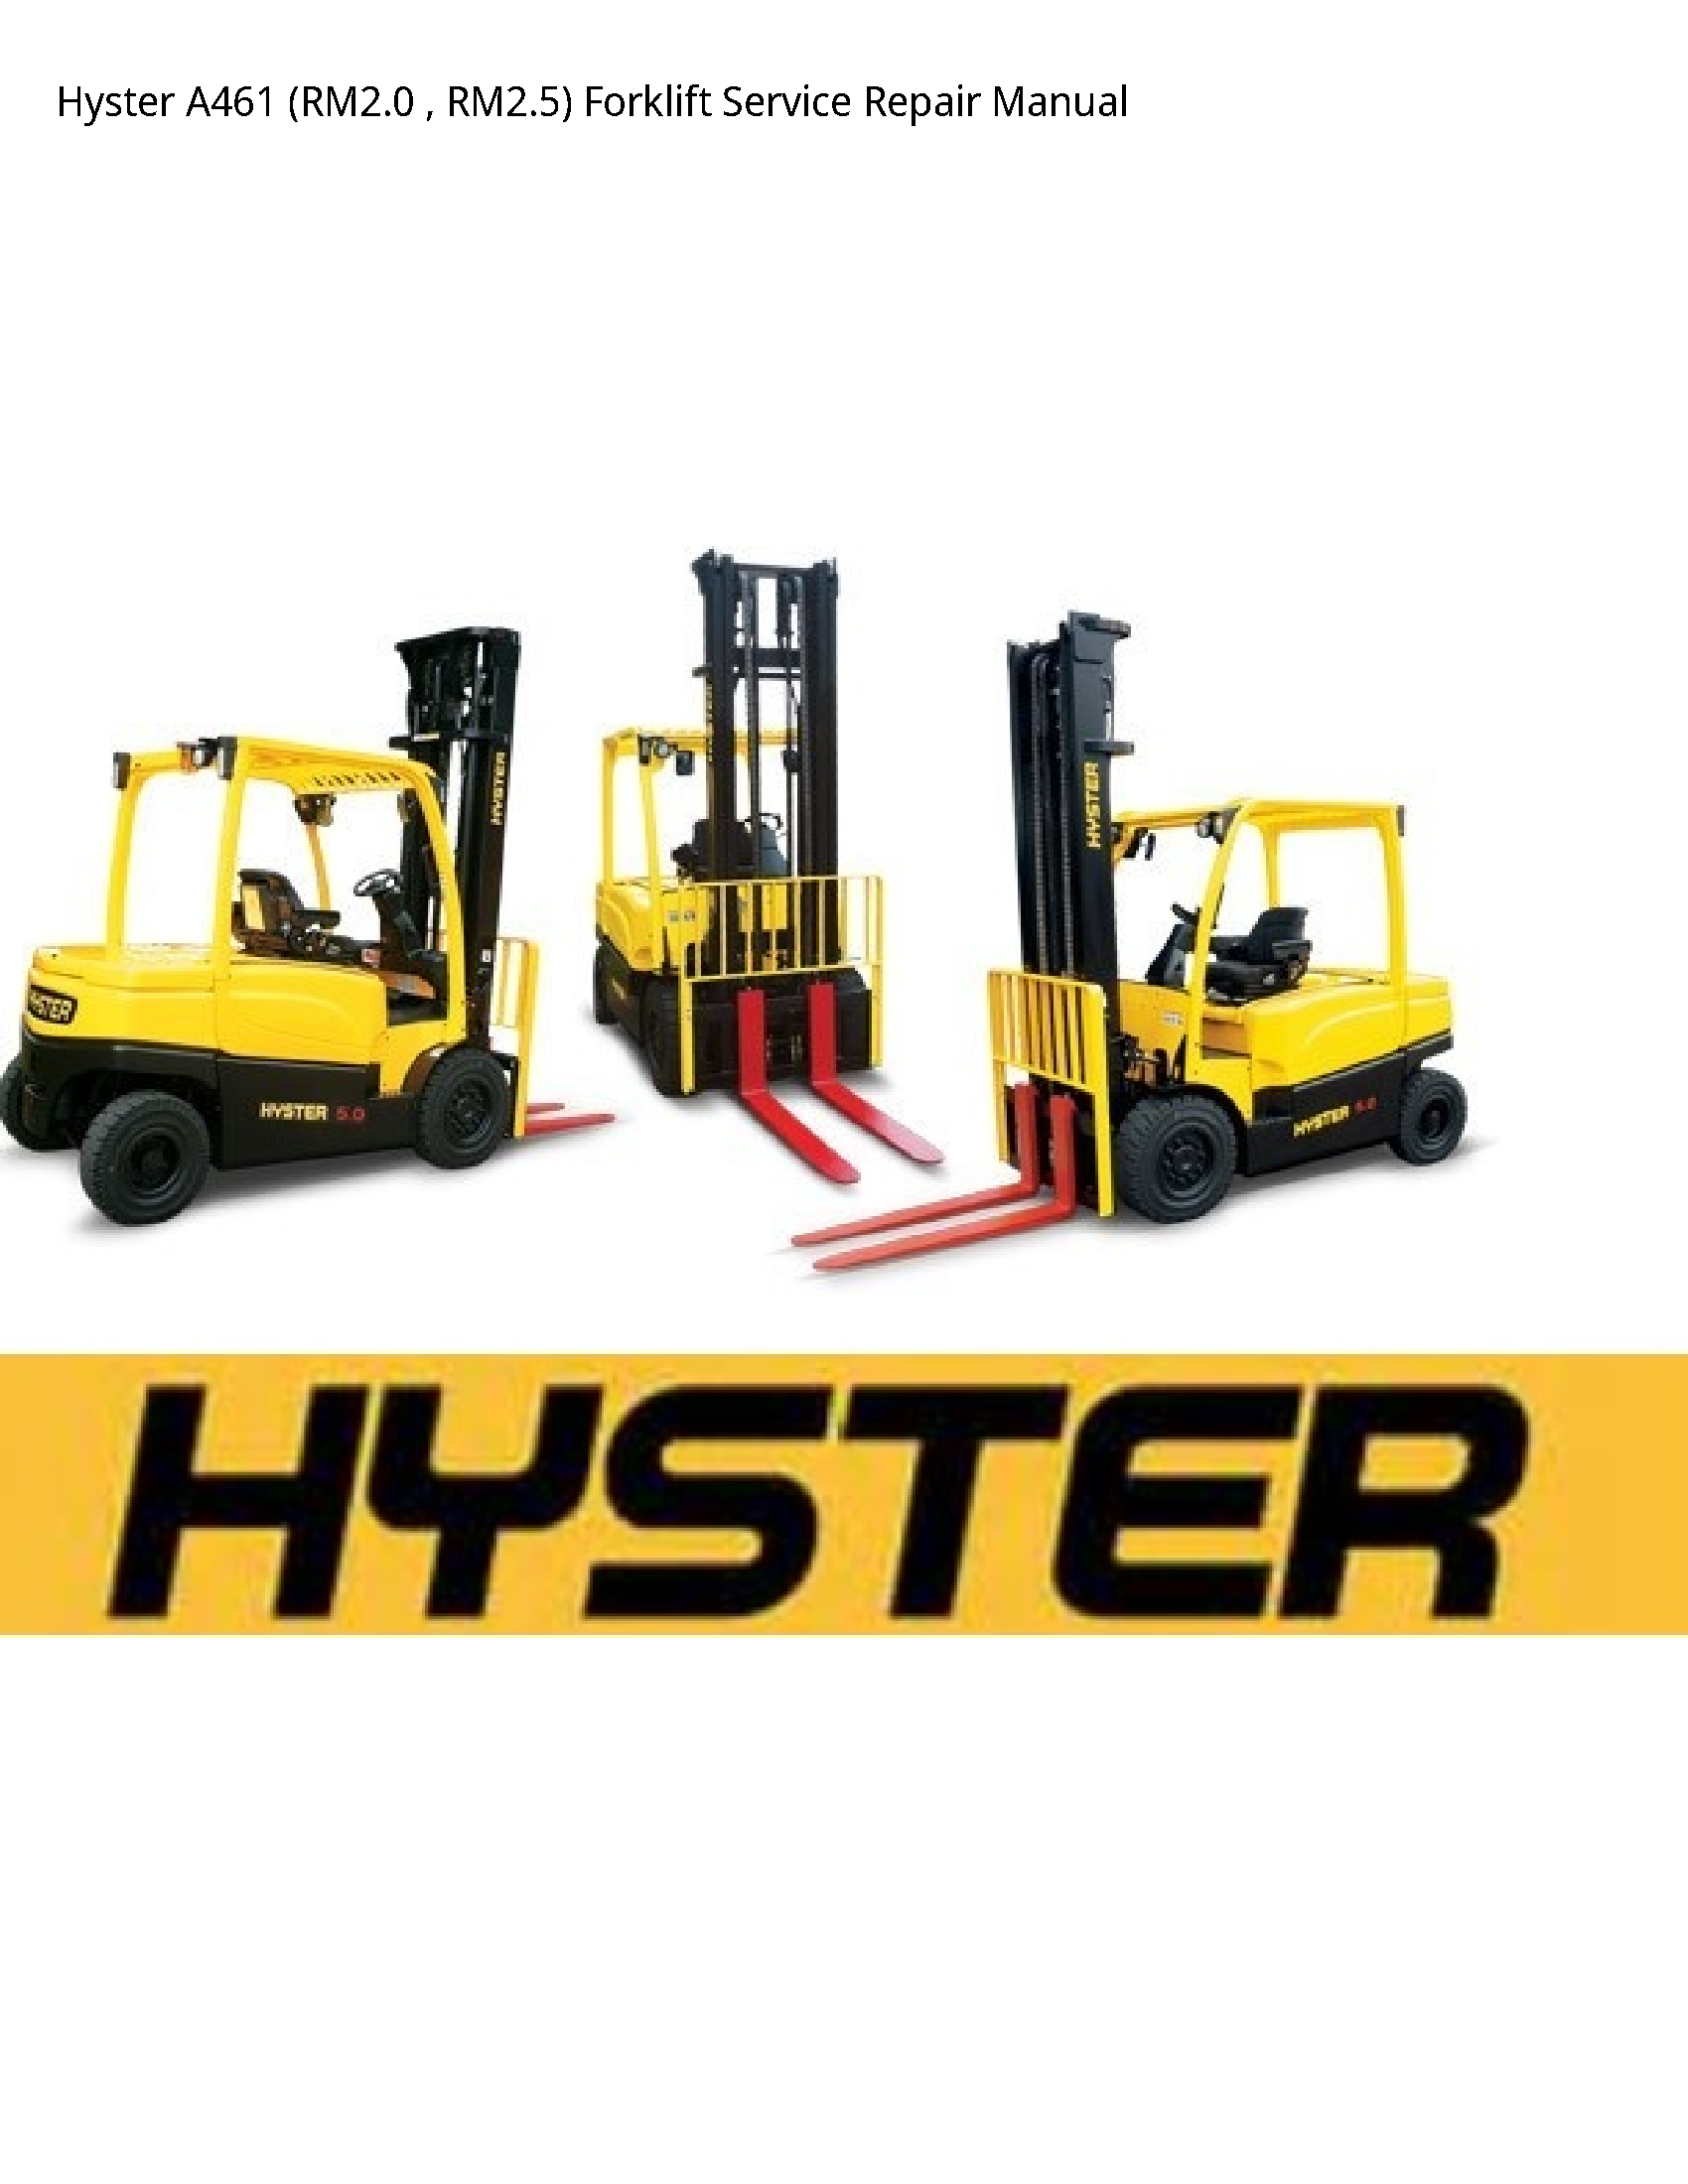 Hyster A461 Forklift manual